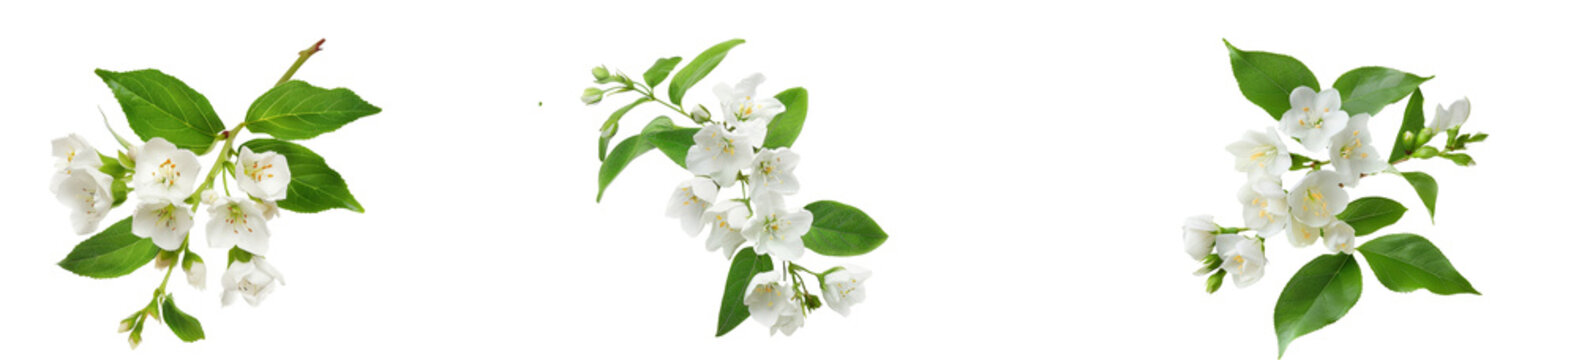 Jasmine (Philadelphus) flowers and leaves in a floral arrangement isolated on white or transparent background stock photo 